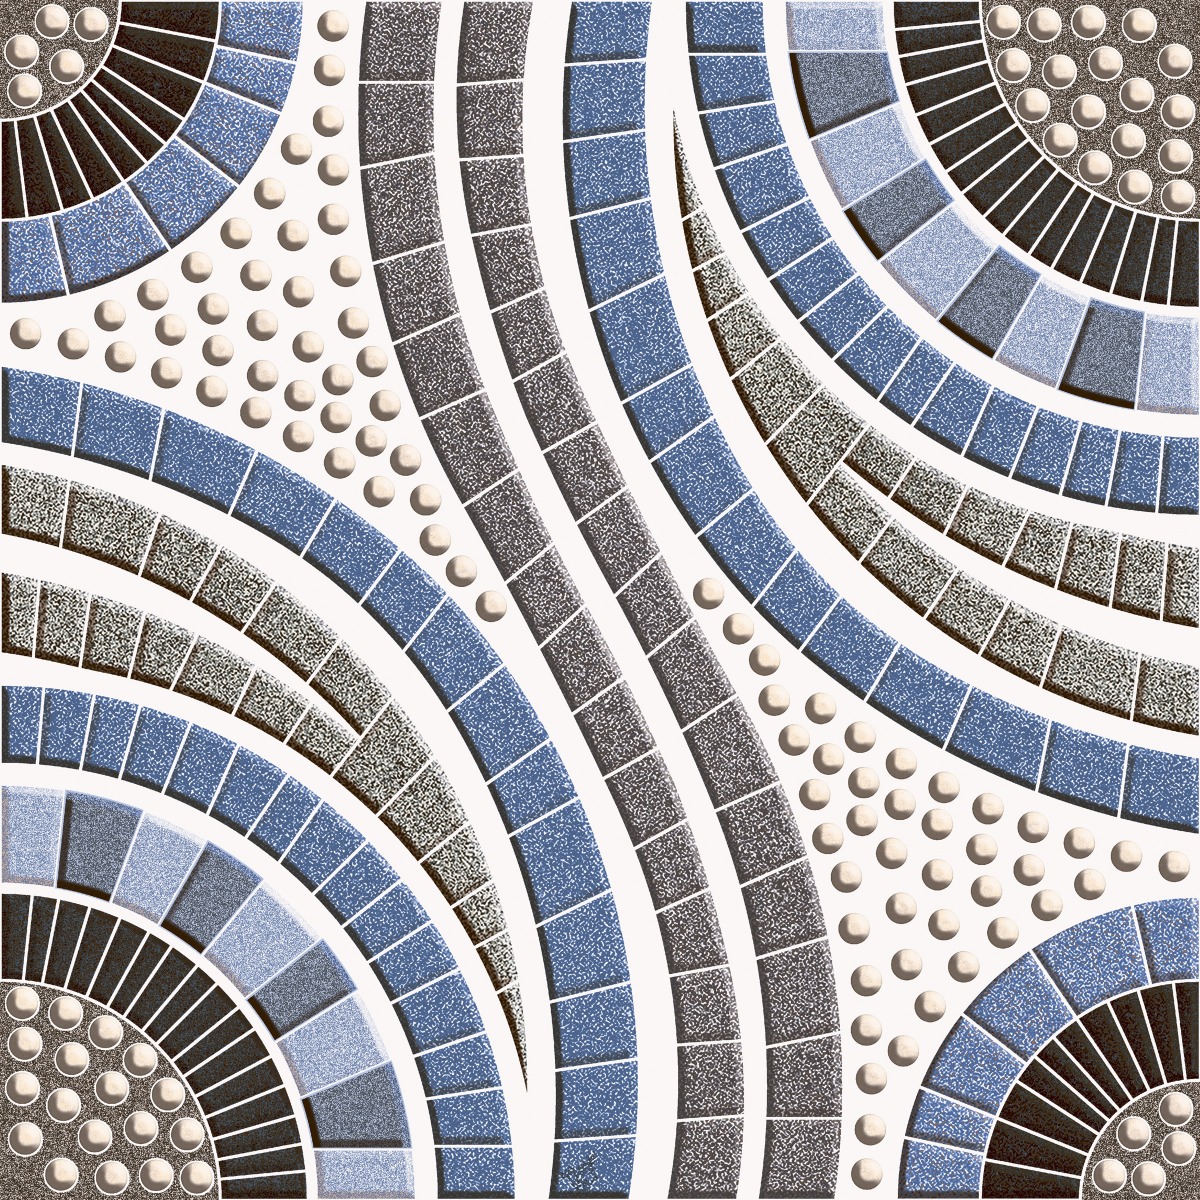 Swimming Pool Tiles for Balcony Tiles, Swimming Pool Tiles, Parking Tiles, Pathway Tiles, Commercial/Office, Outdoor Area